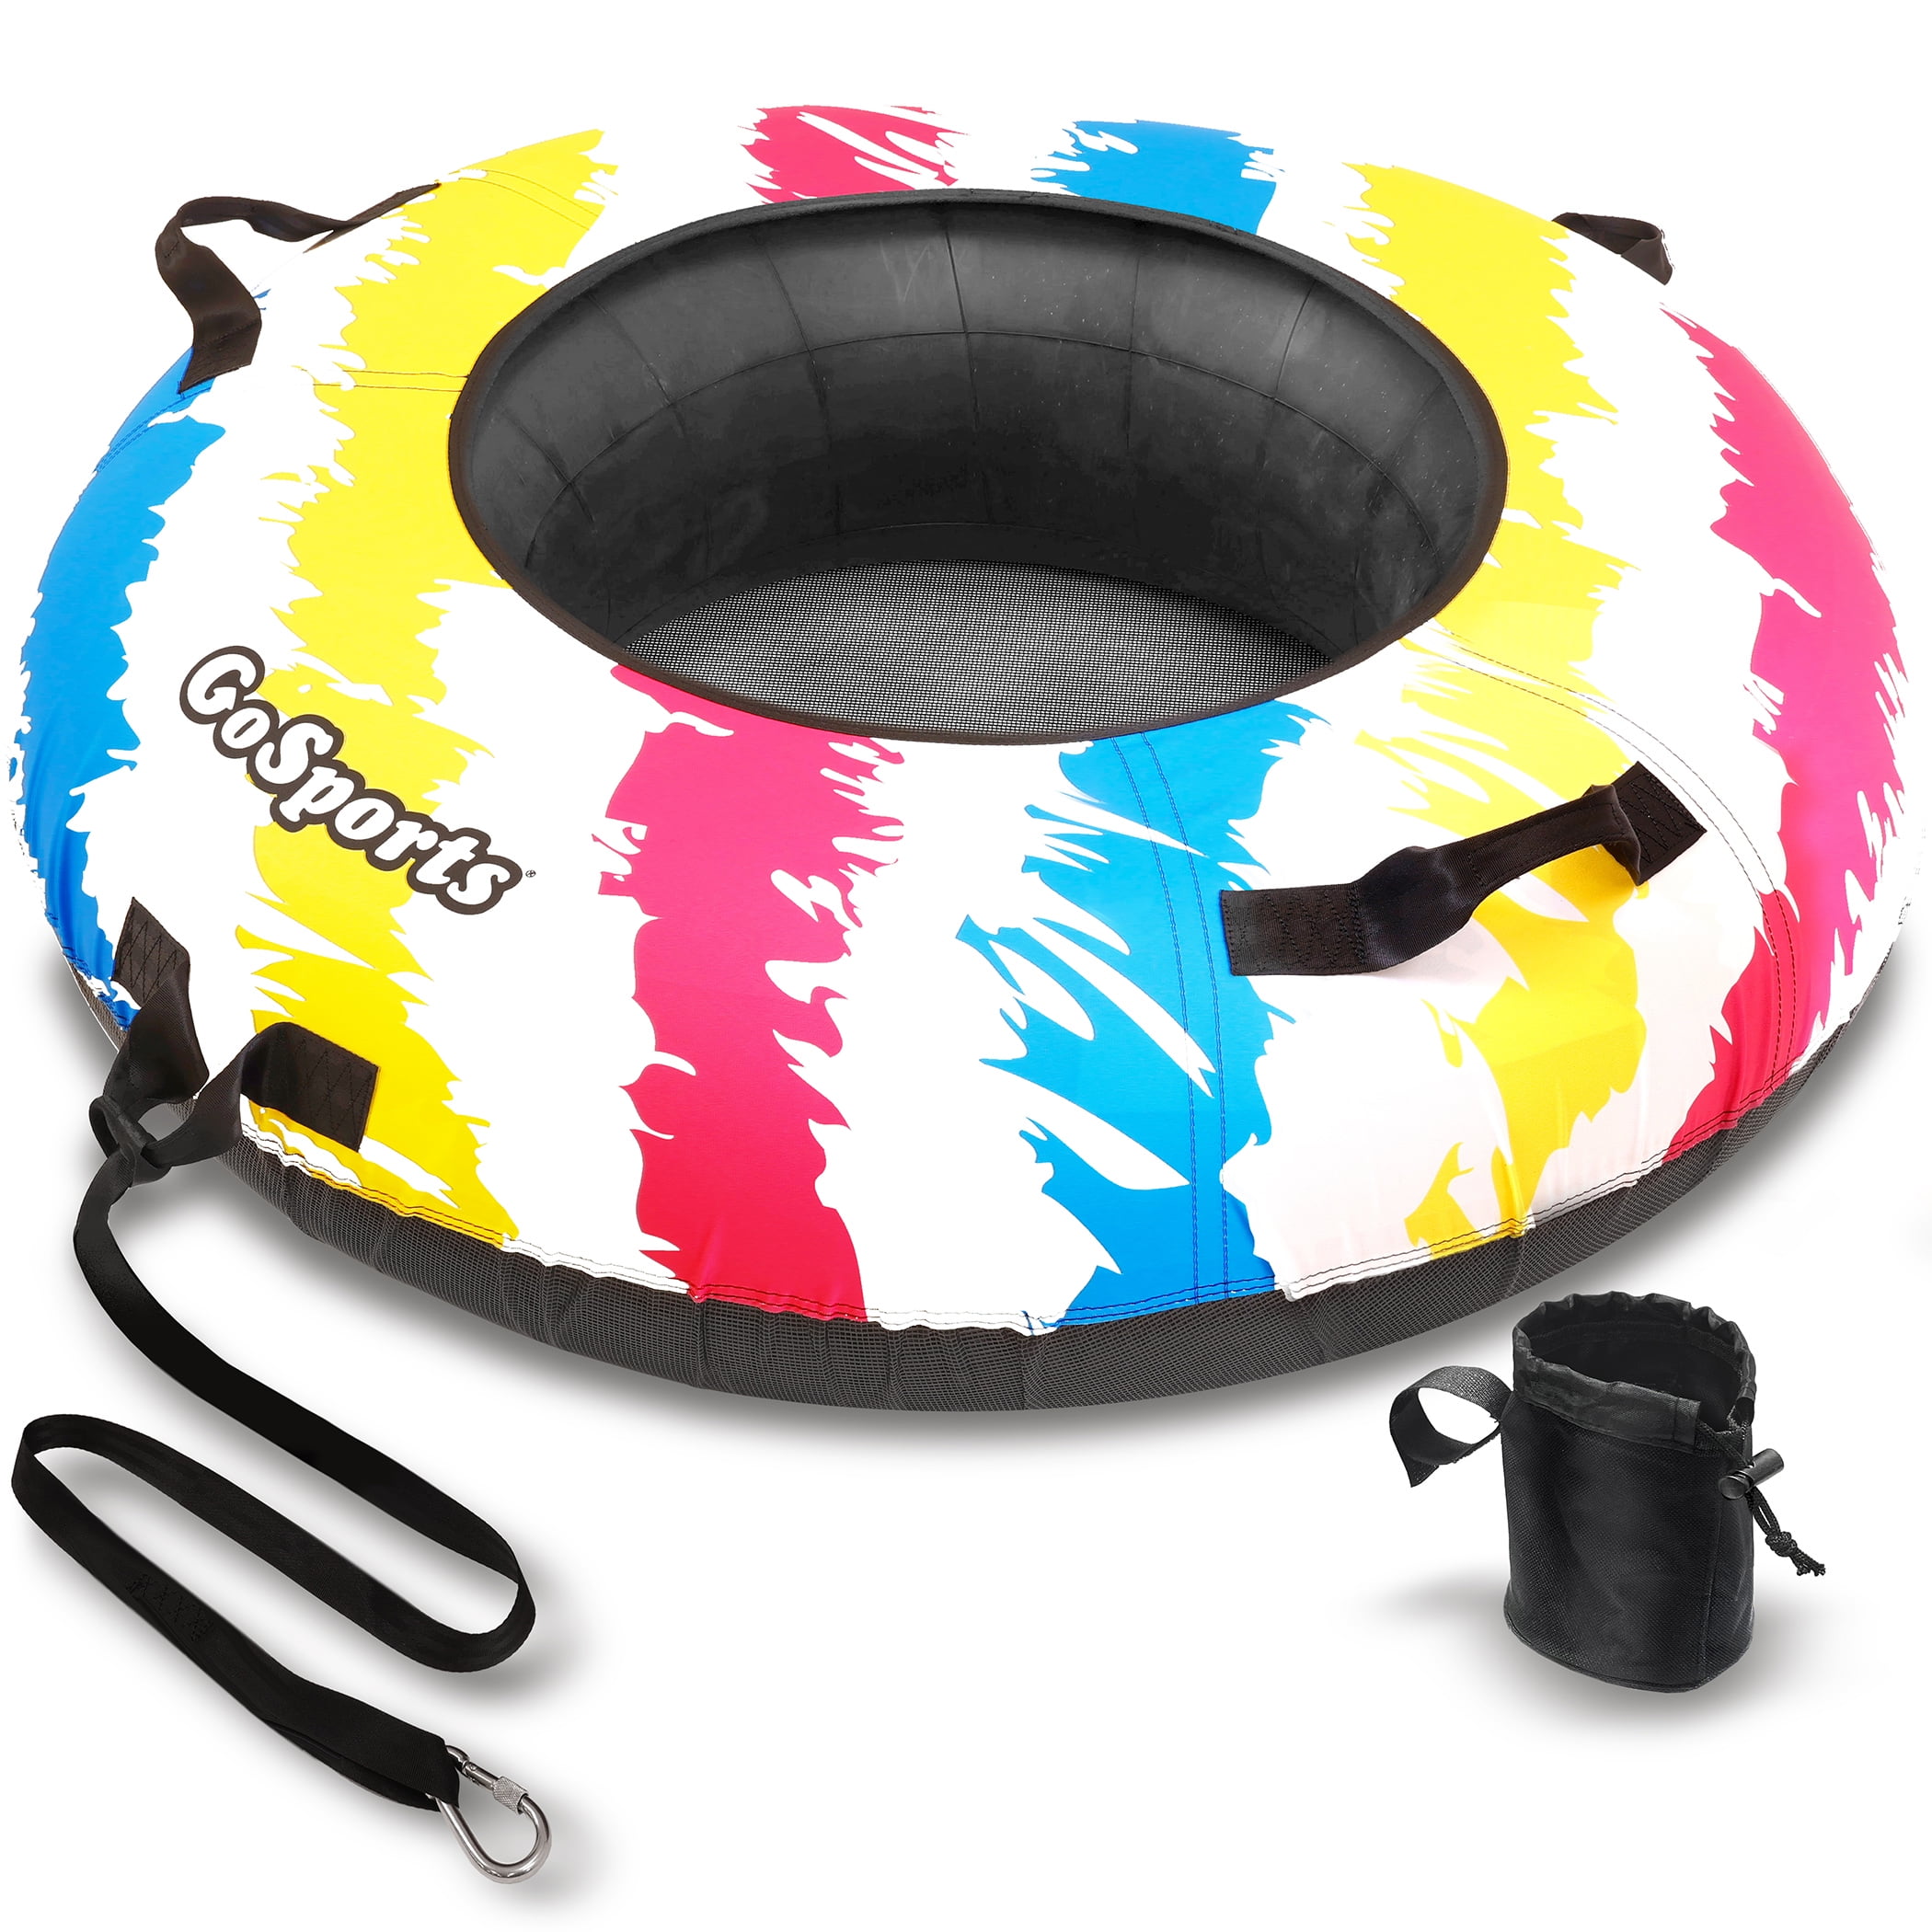 GoSports 44 Heavy Duty River Tube with Premium Canvas Cover Commercial Grade River Tube Choose Your Style 